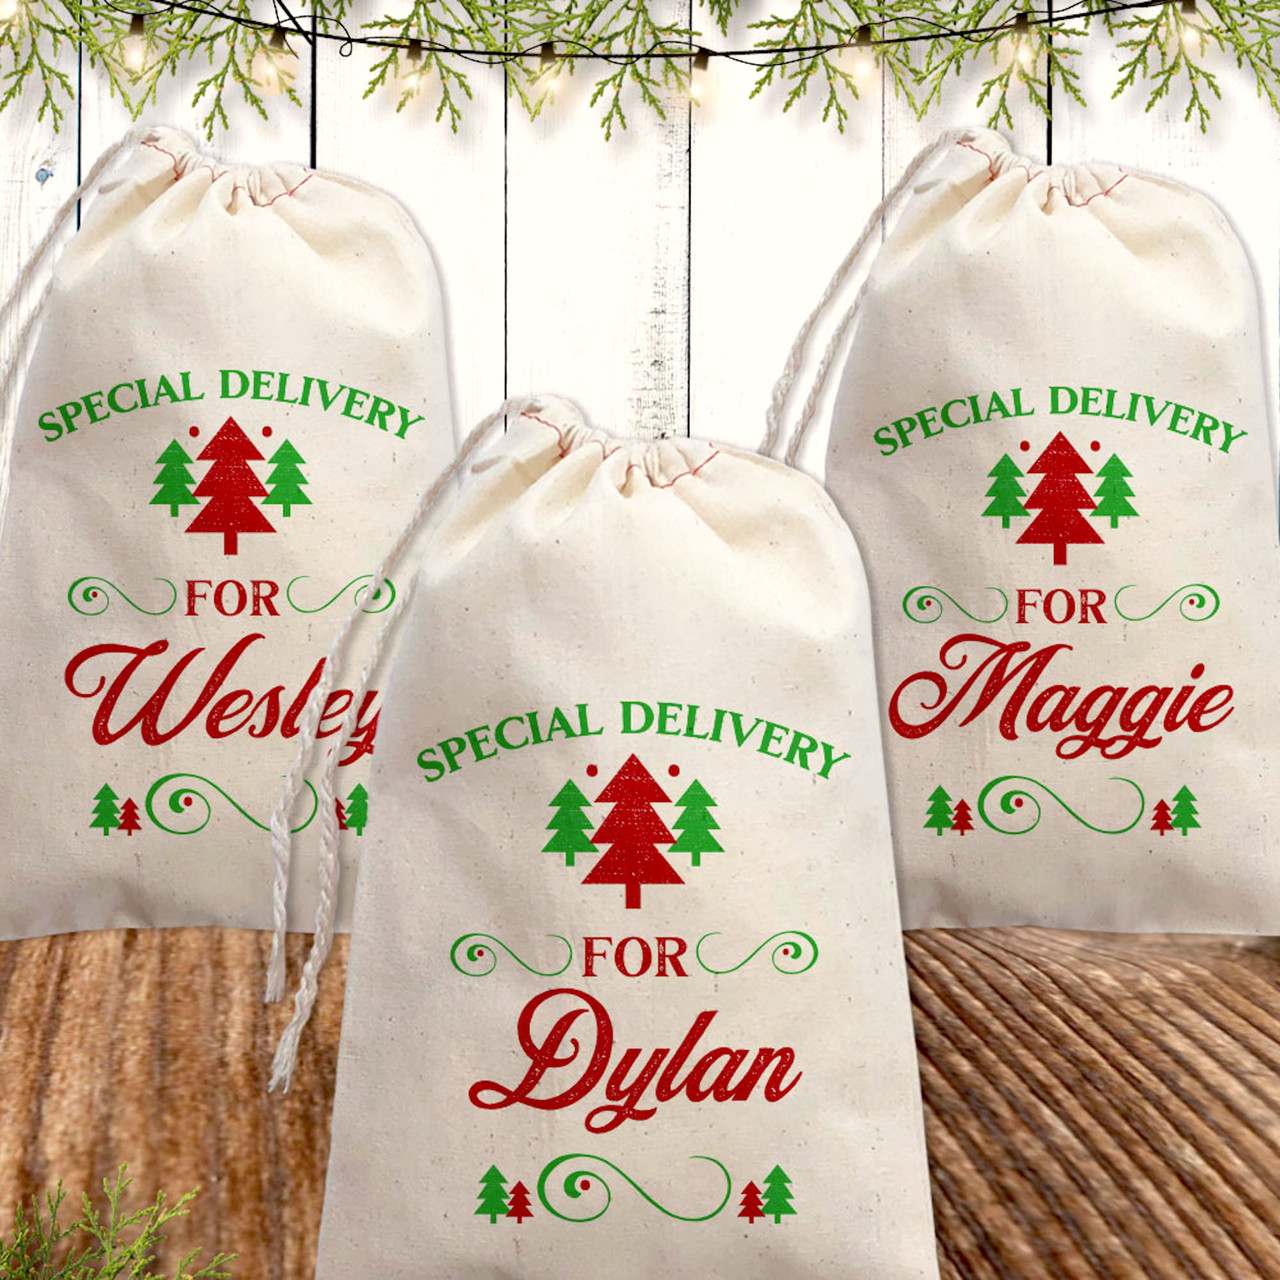 https://cdn11.bigcommerce.com/s-5grzuu6/images/stencil/1280w/products/4847/43394/Special-Delivery-Personalized_Christmas_Gift-Bags__09768.1634582774.jpg